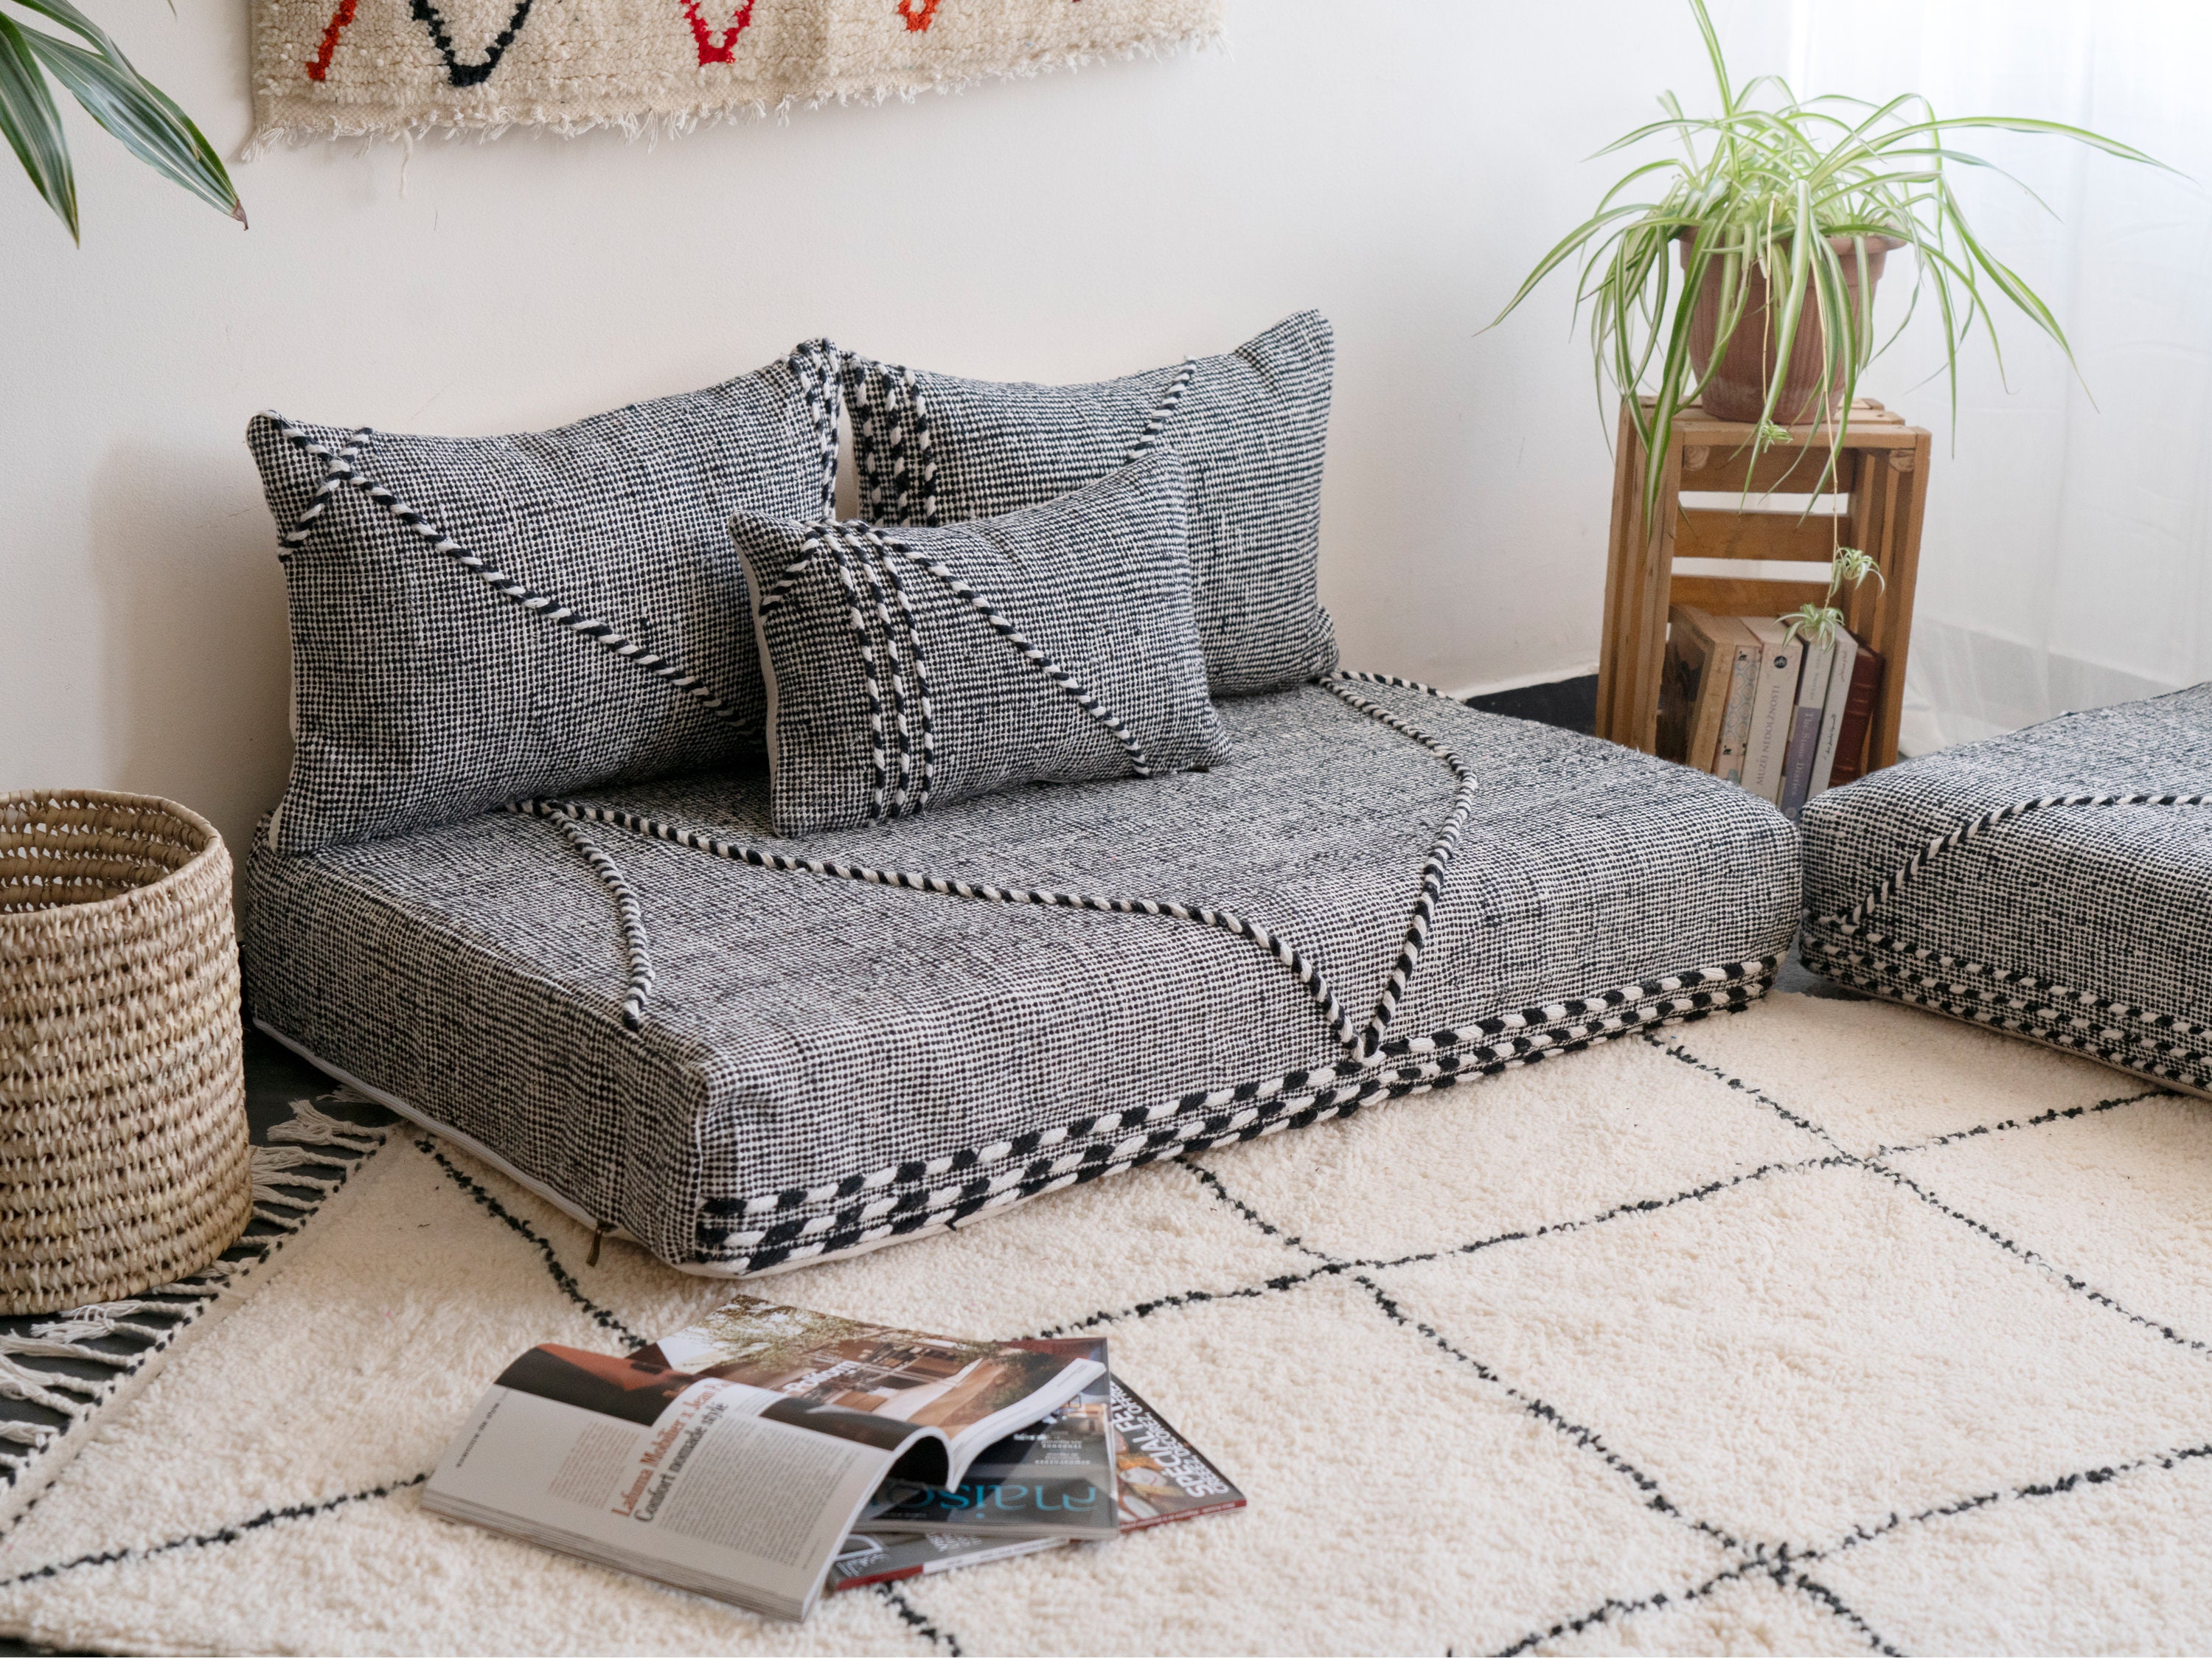 FREE SHIPPING Moroccan Floor Sofa 6 Ft 180x70x15 Cm Unstuffed Long Floor  Cushion 1 Floor Cushion Stuffing Zipped Pouches 